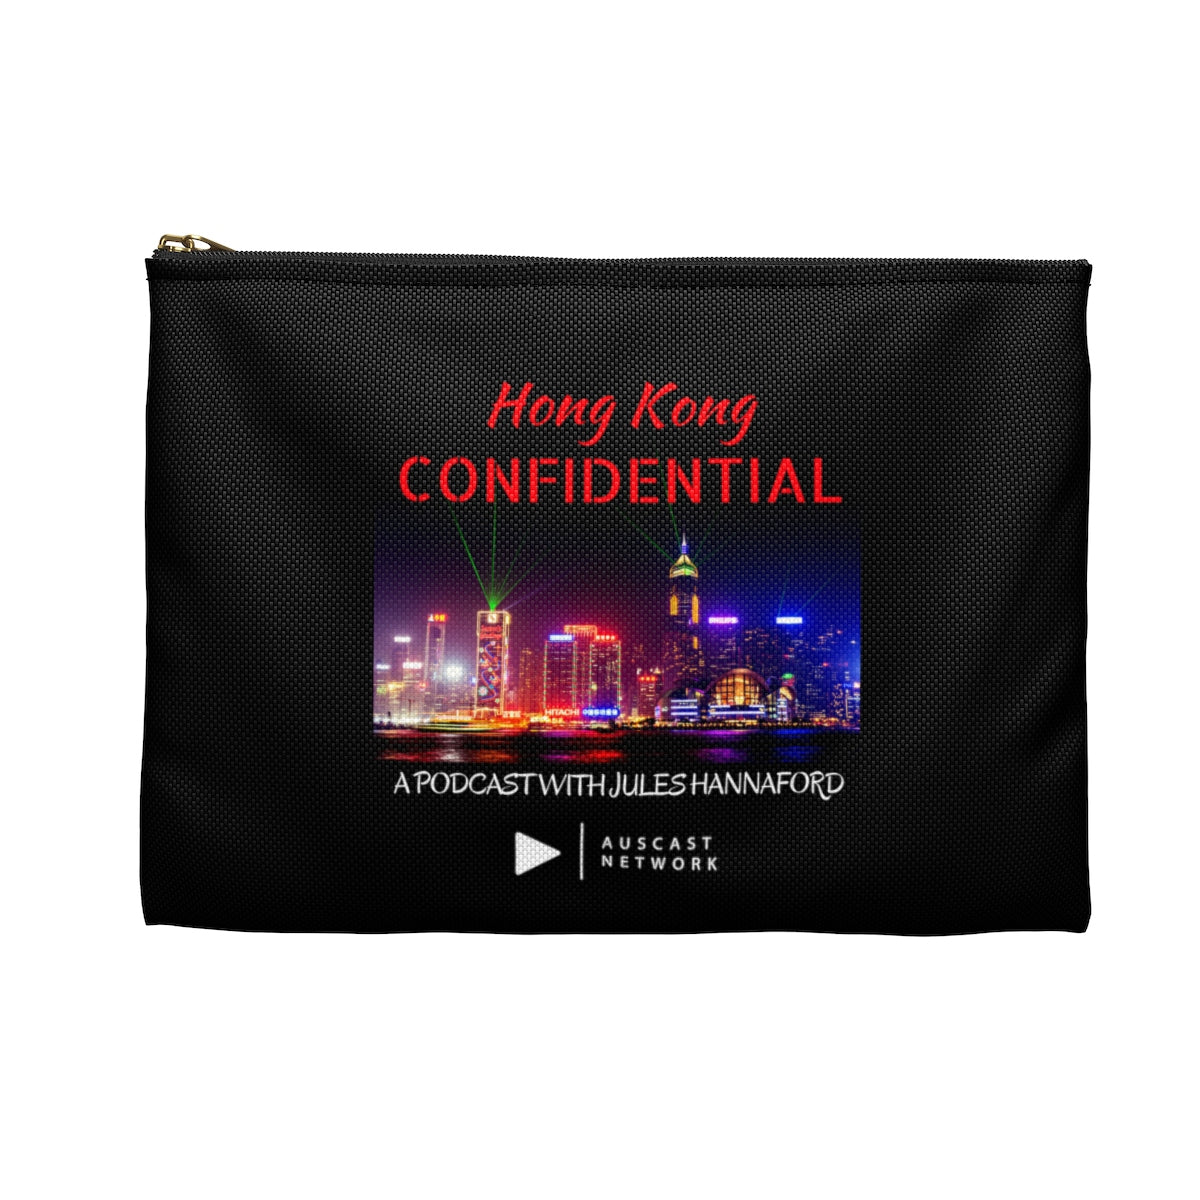 Hong Kong Confidential Accessory Pouch